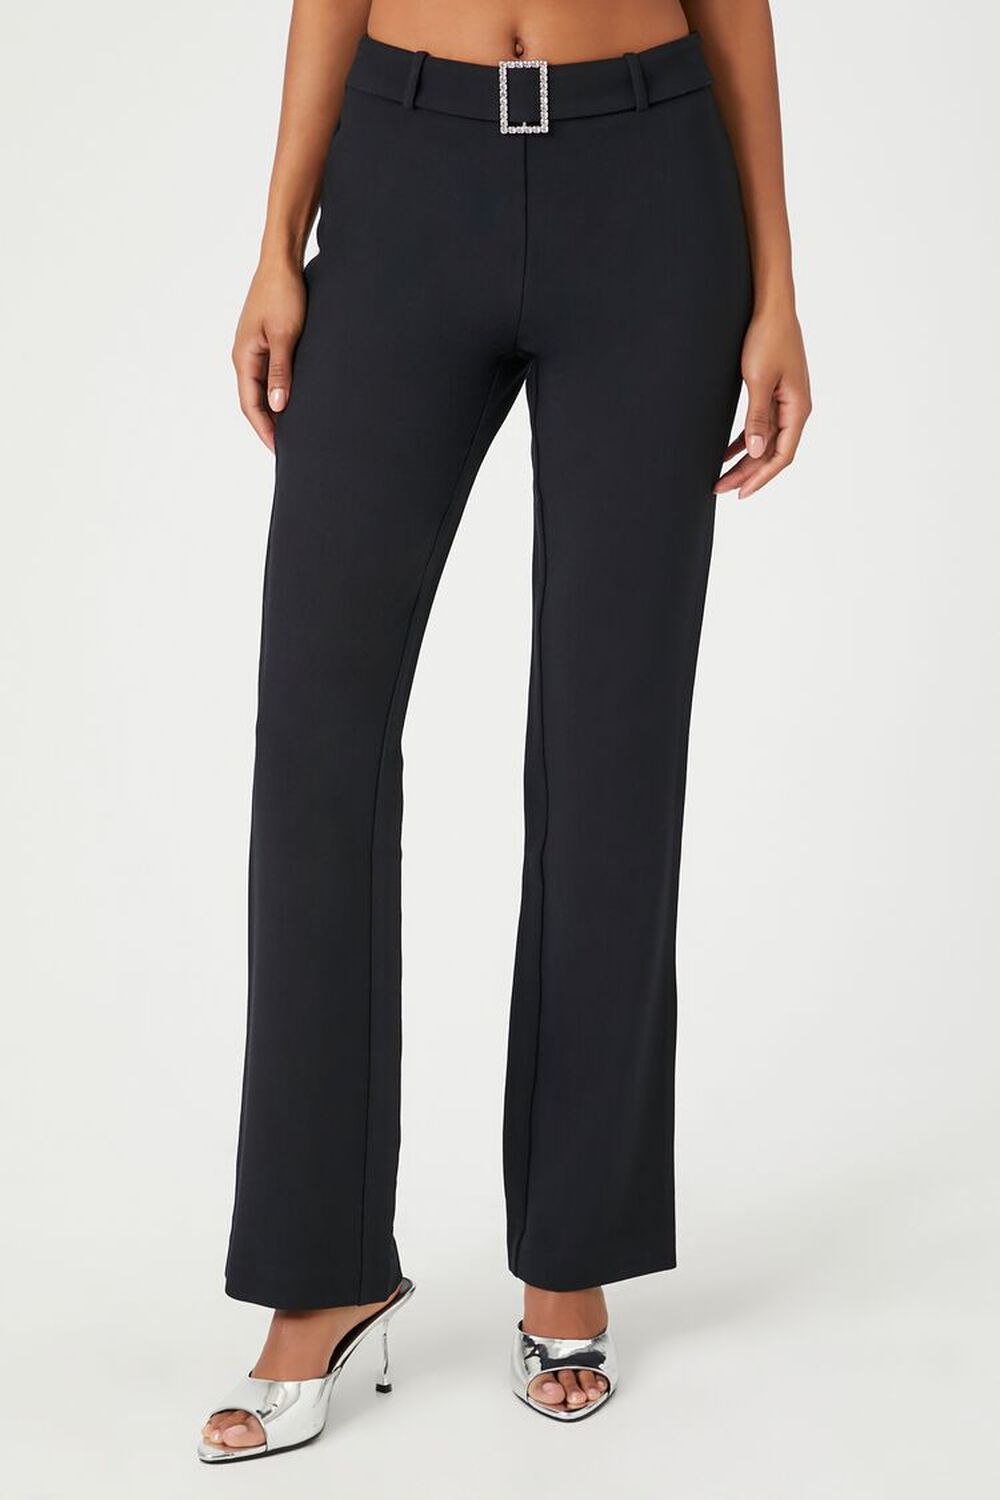 Forever 21 Contemporary Belted Flare Pants, $22, Forever 21